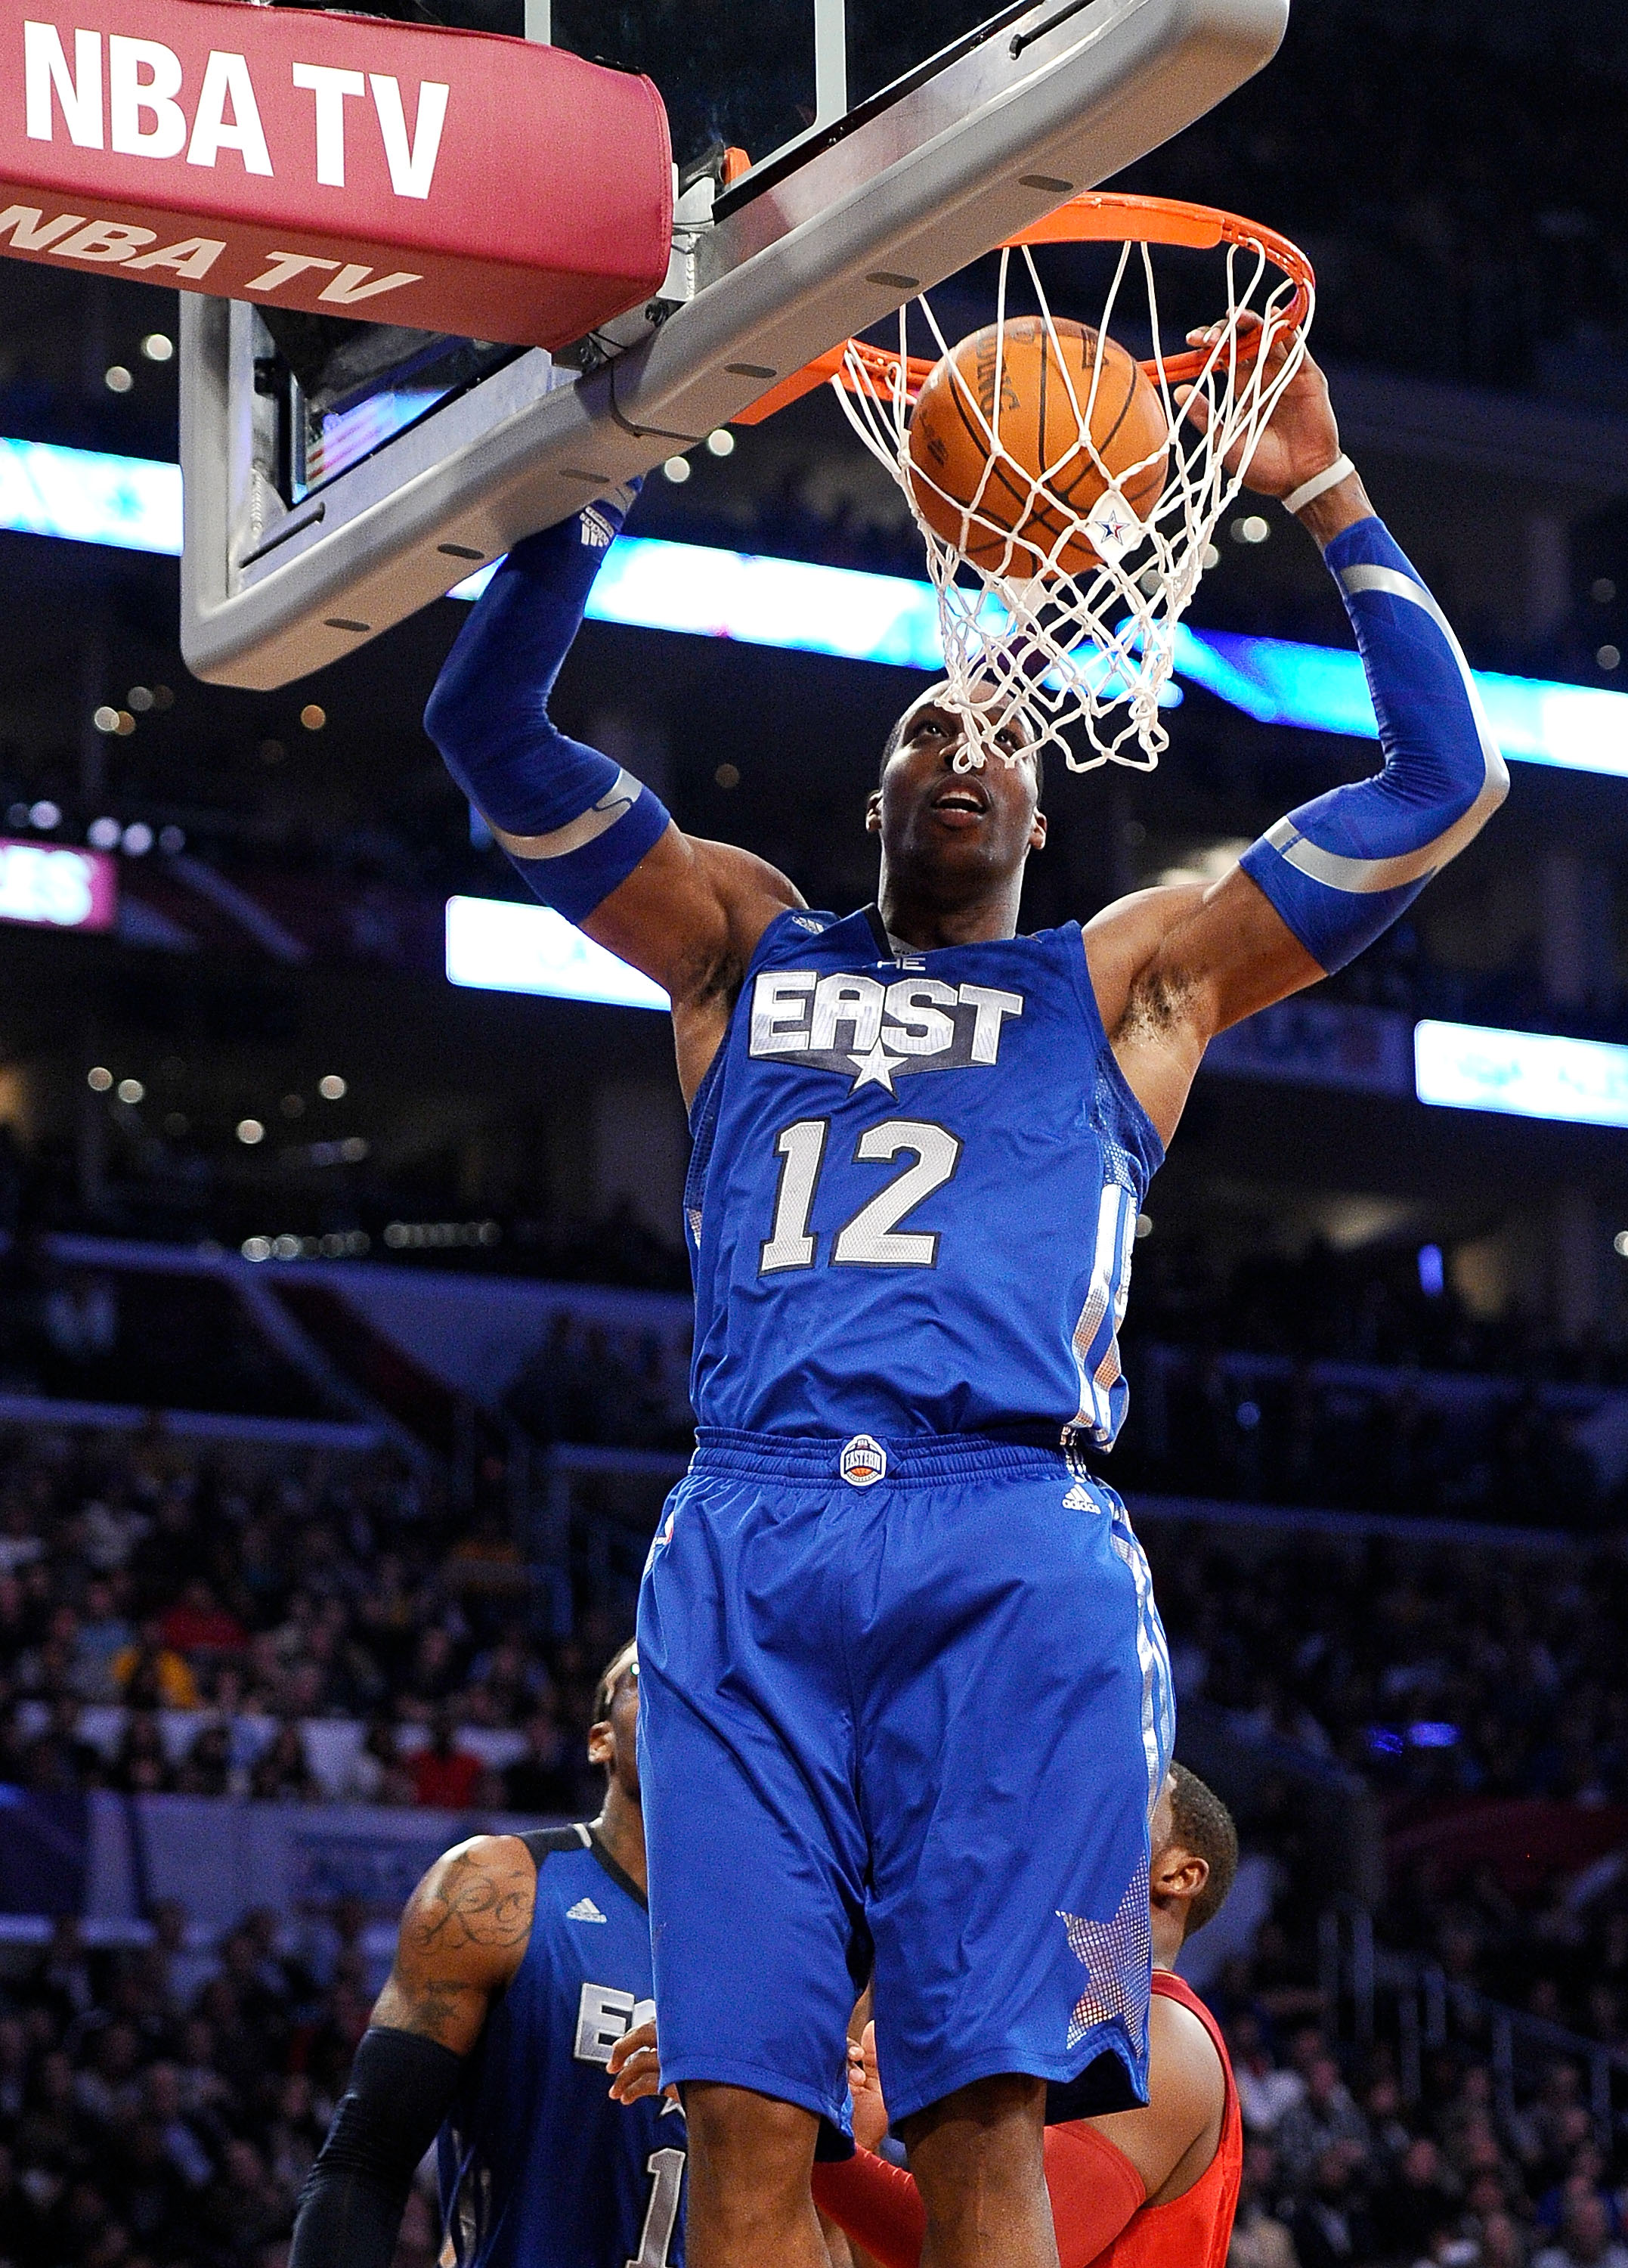 LOS ANGELES, CA - FEBRUARY 20:  Dwight Howard #12 of the Orlando Magic and the Eastern Conference dunks the ball in the 2011 NBA All-Star Game at Staples Center on February 20, 2011 in Los Angeles, California. NOTE TO USER: User expressly acknowledges and